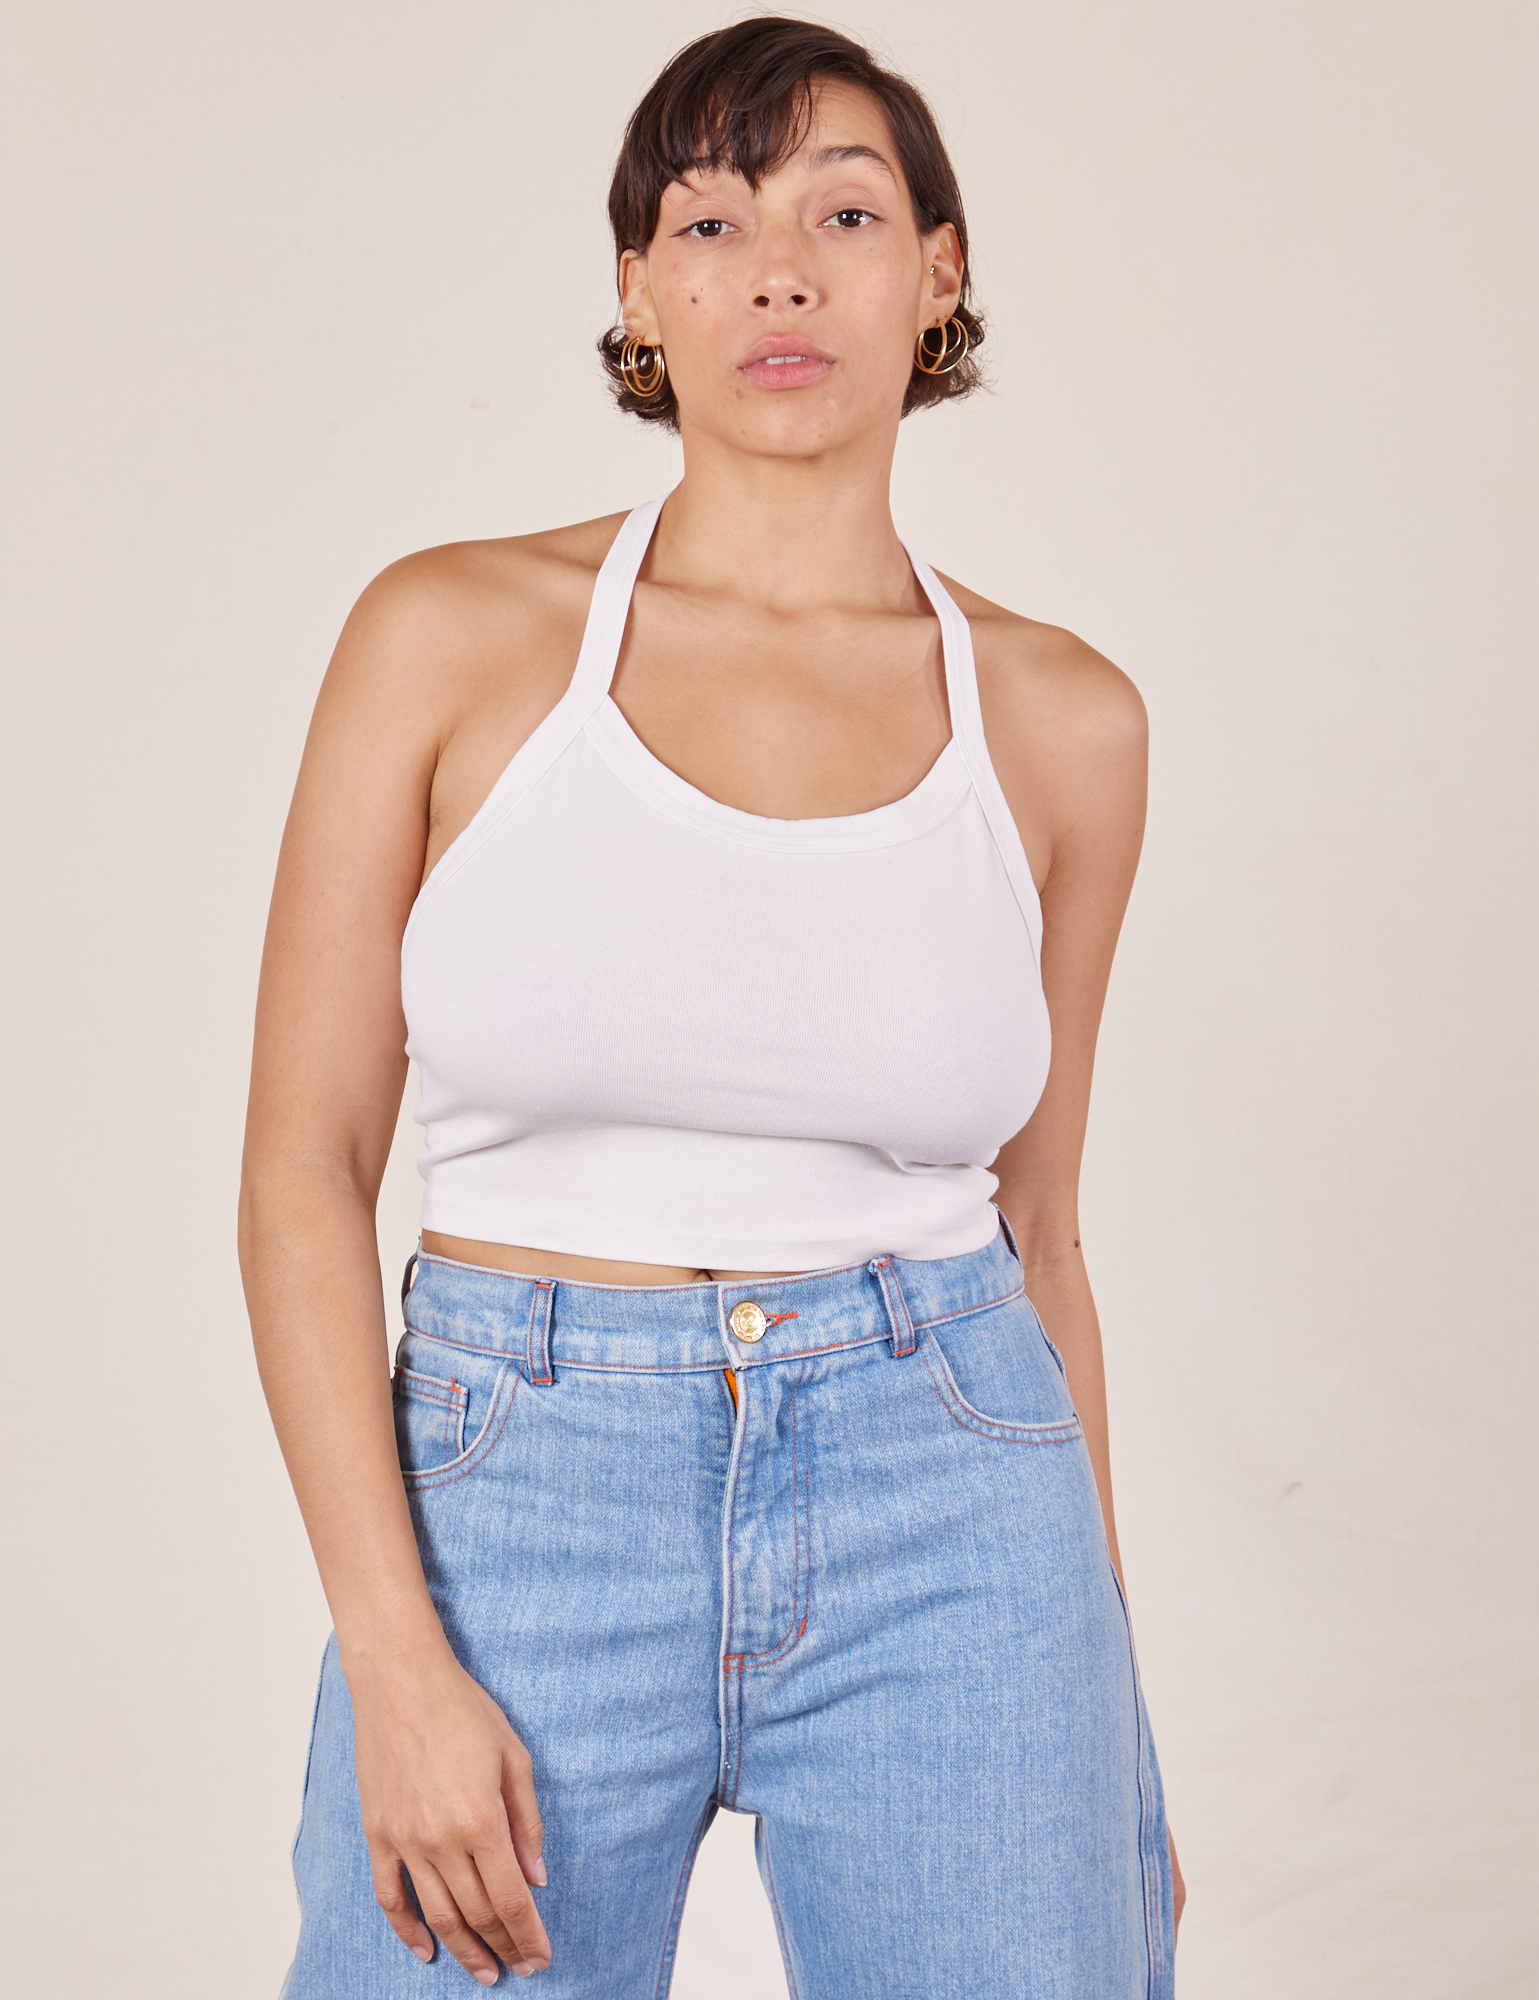 Tiara is 5&#39;4&quot; and wearing XS Halter Top in Vintage Tee Off-White paired with light wash Sailor Jeans